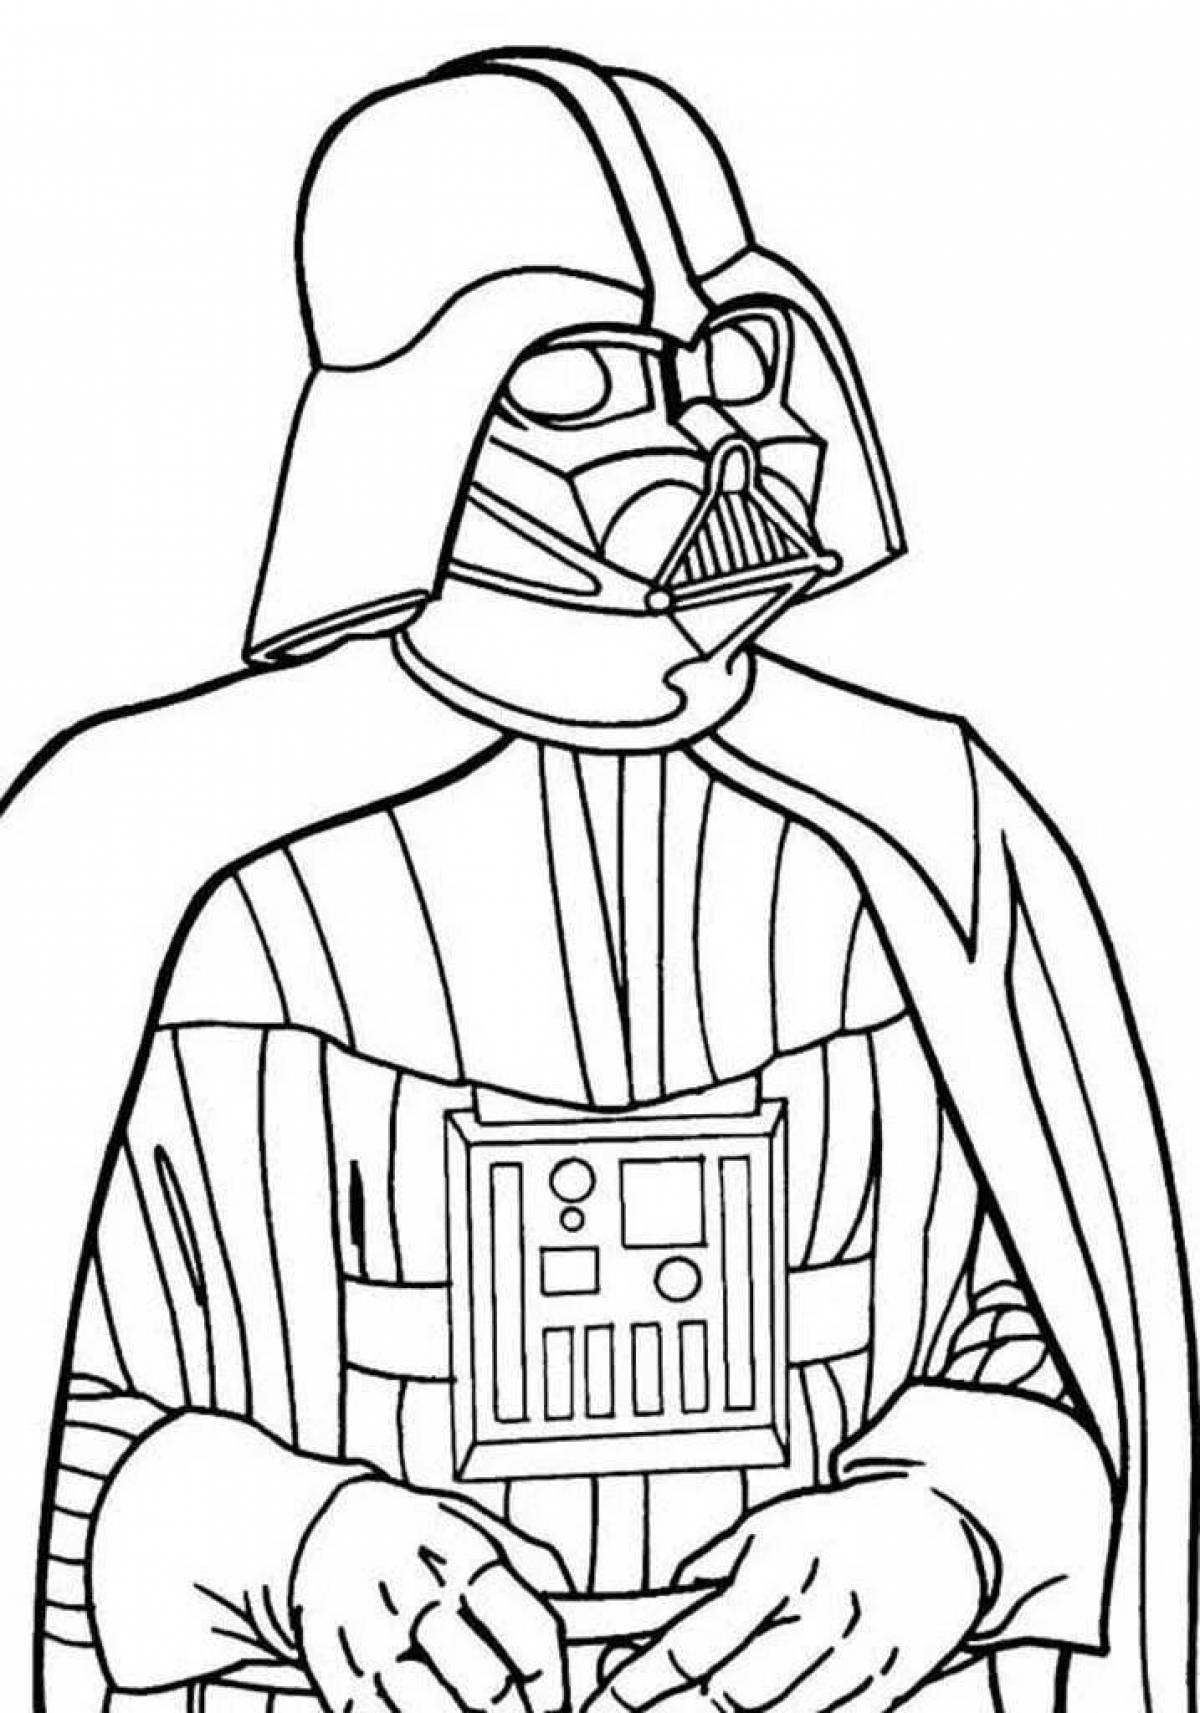 Star wars reference coloring book